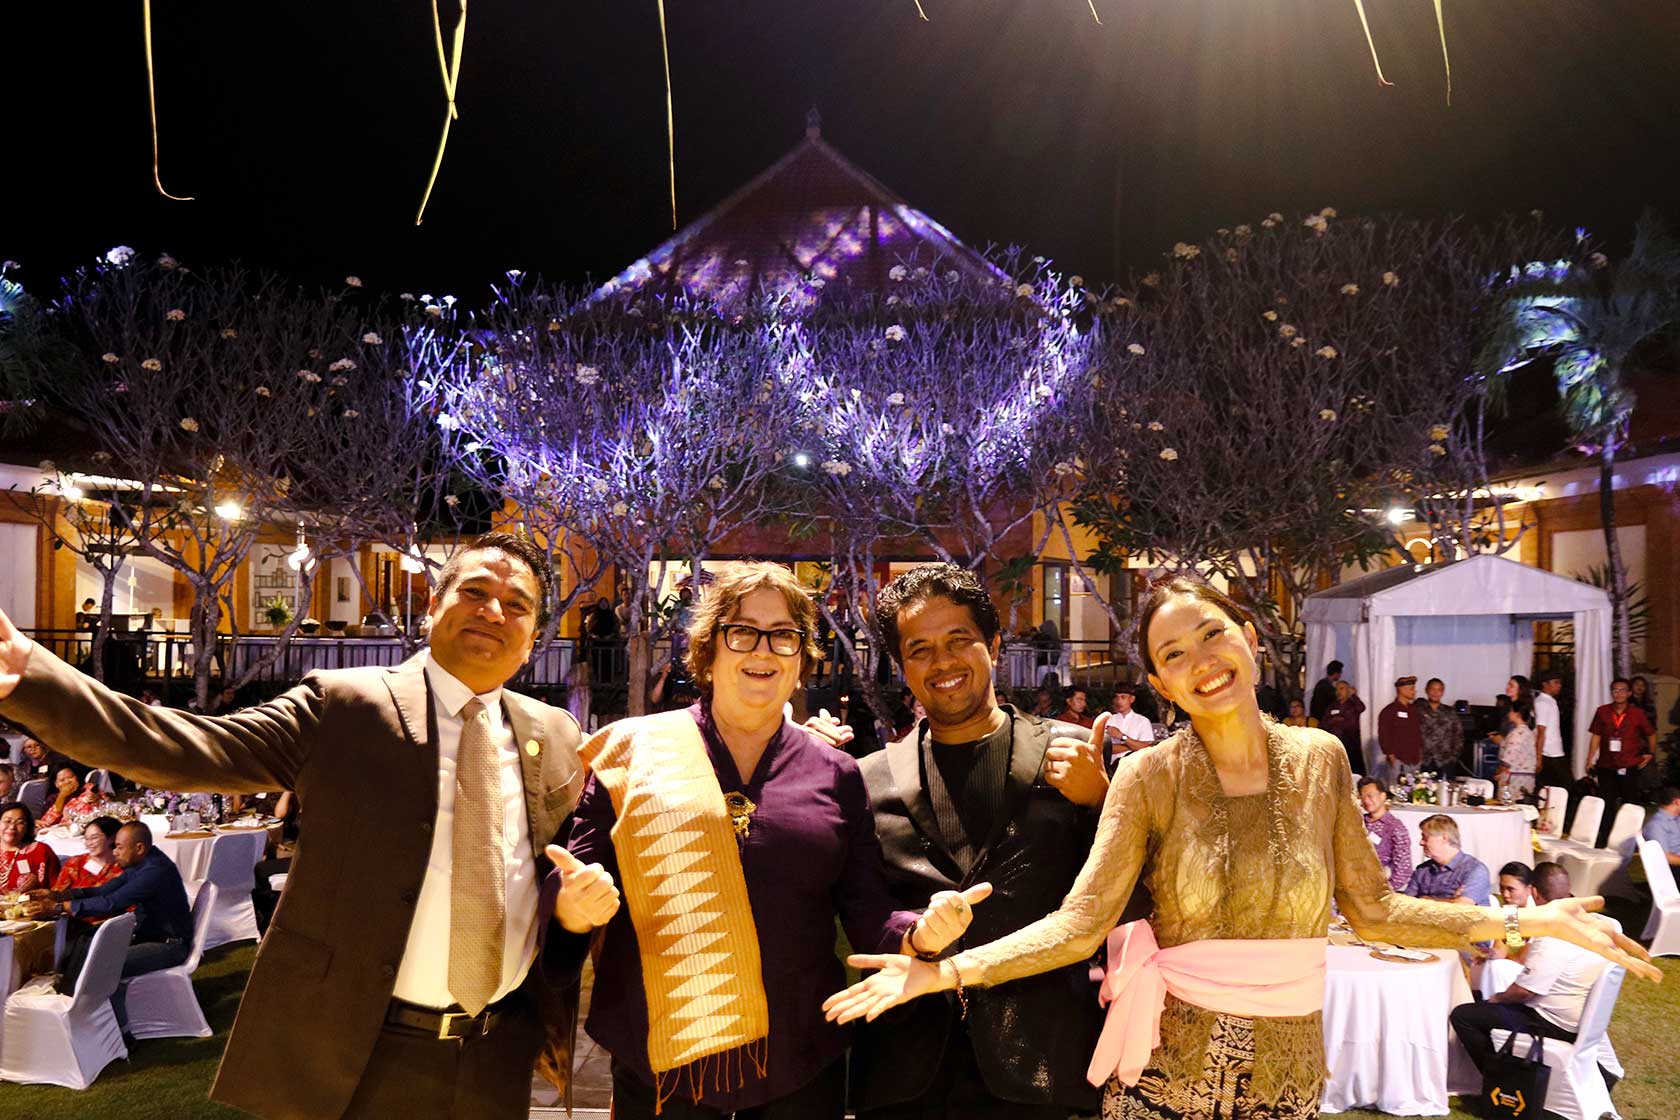 Australian Consul-General in Bali, Ms. Anthea Griffin, captures a memorable moment with Gala Dinner Bali MC and alumna Cheryl Marella, along with performers Balawan and Indra Lesmana.